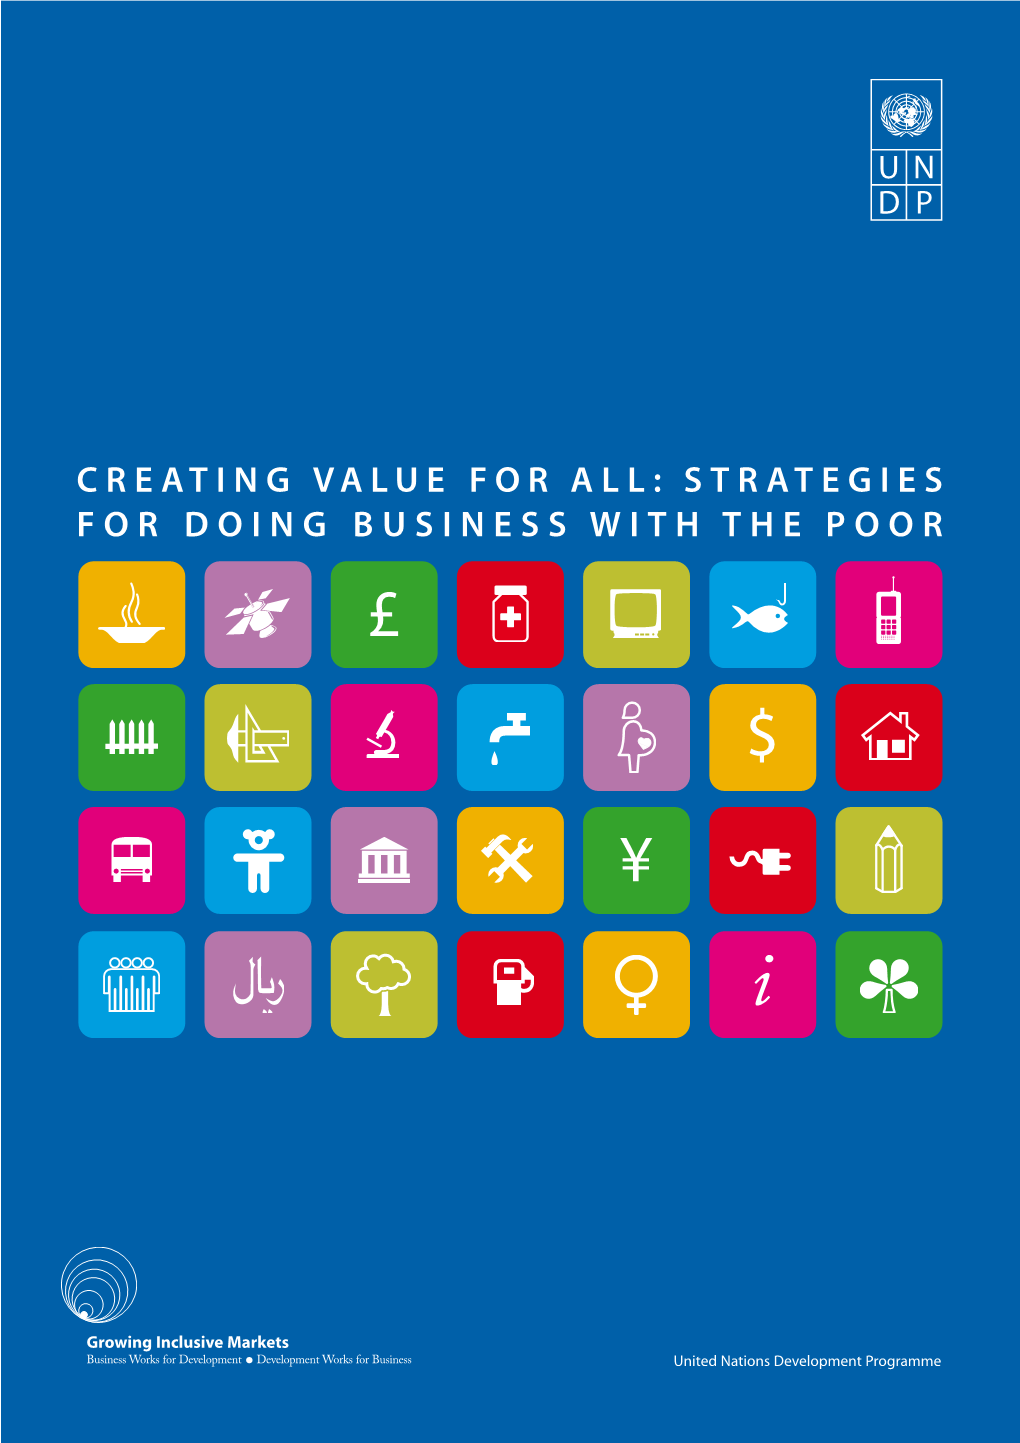 CREATING VALUE for ALL: STRATEGIES for DOING BUSINESS with the POOR £ $ ¥ I